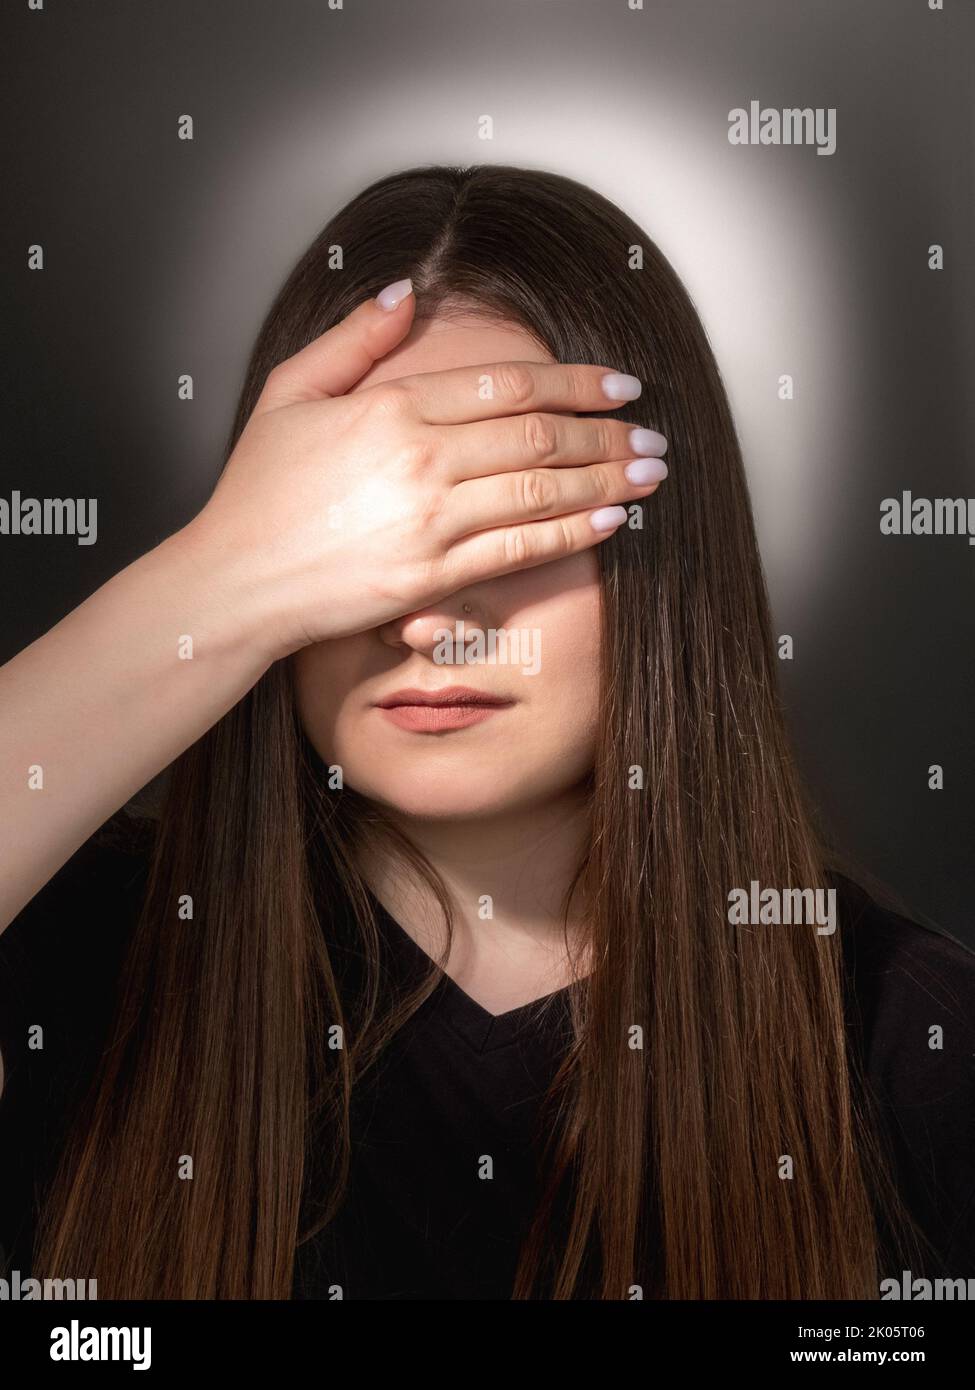 female rights family abuse woman covering eyes Stock Photo